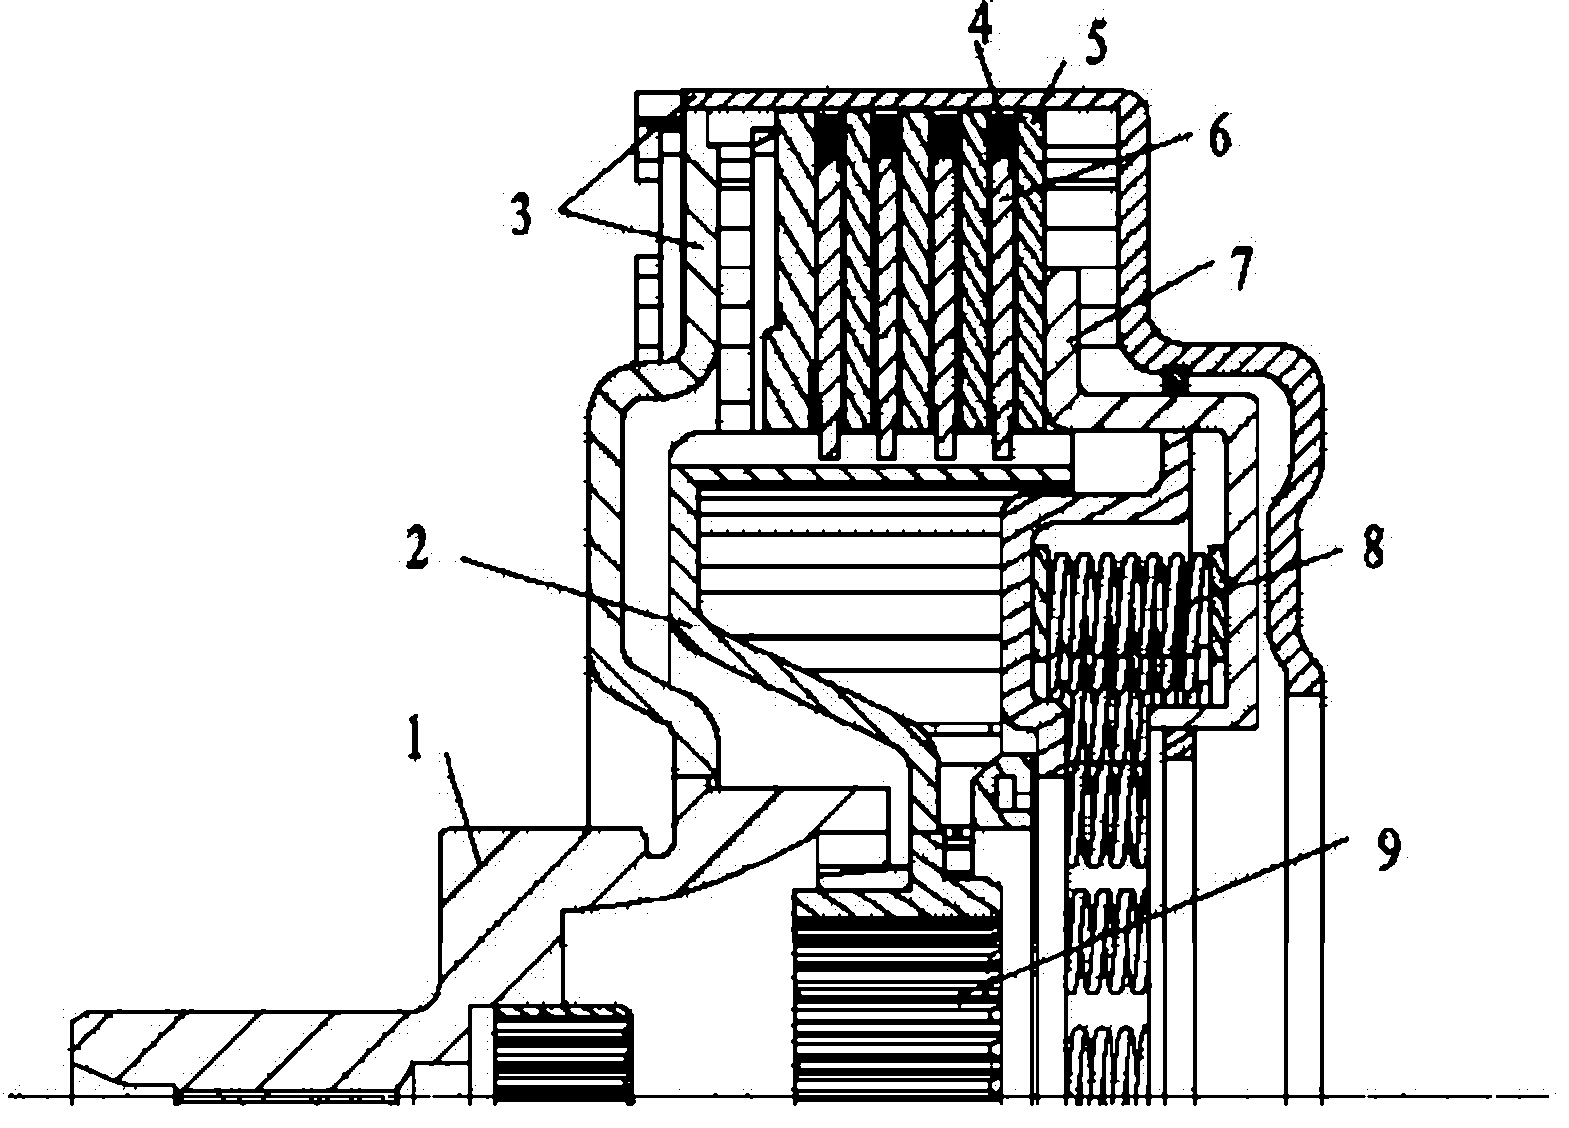 Device for reducing towing loss and abrasion of wet dual-clutch